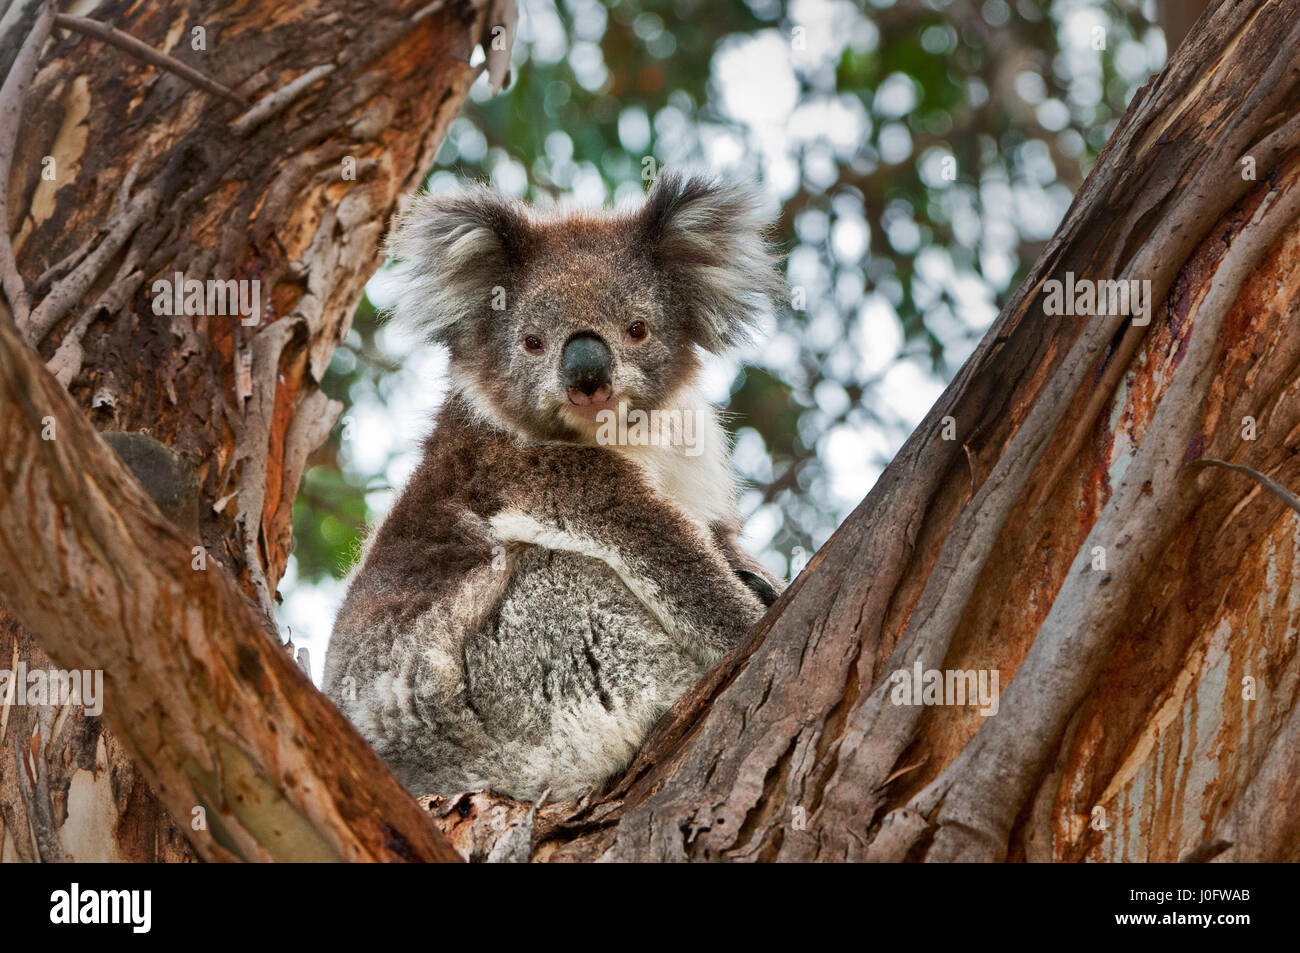 Koala looking curiously from a gum tree. Stock Photo